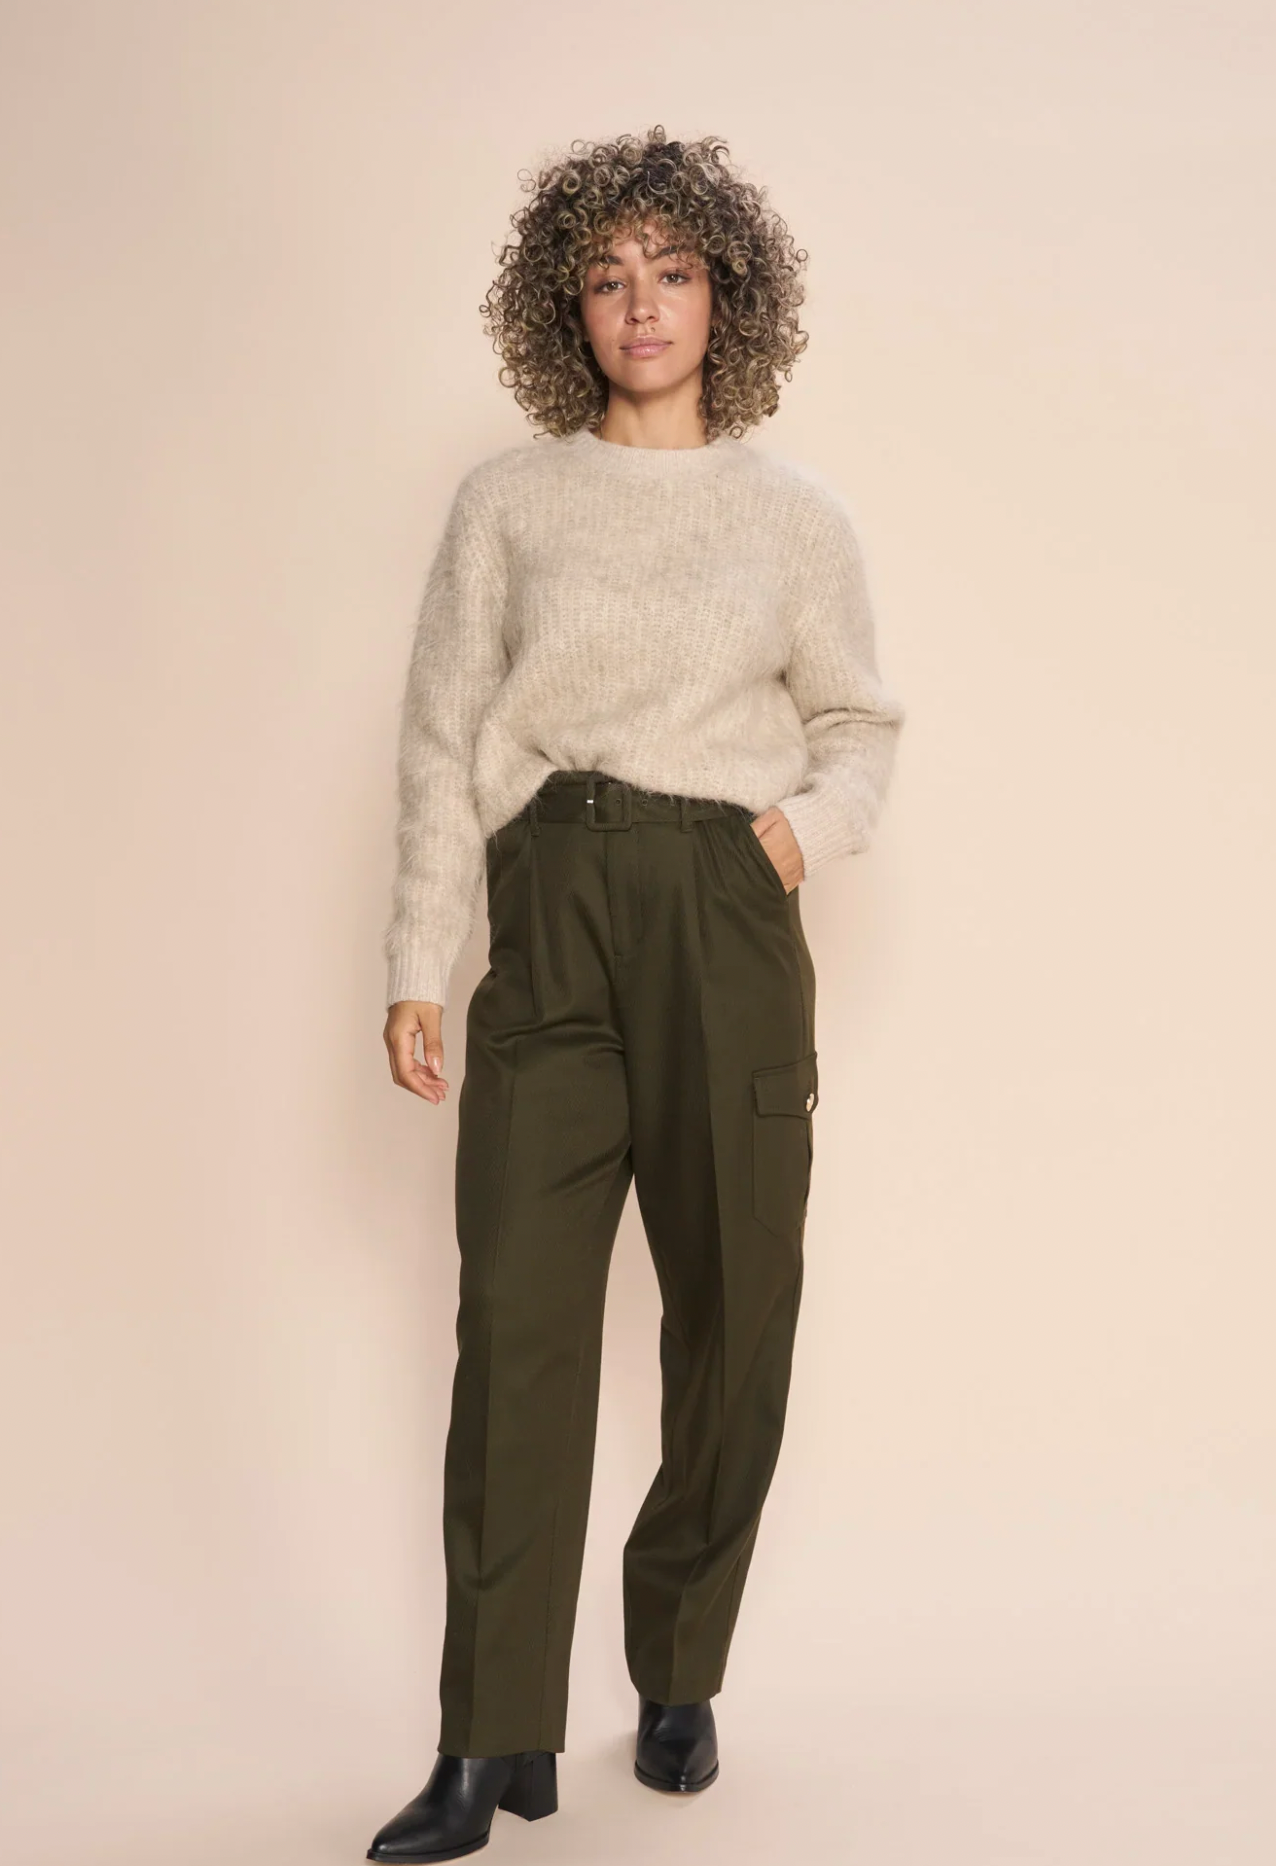 Mos Mosh - Thera Leport Pant in Forest Night